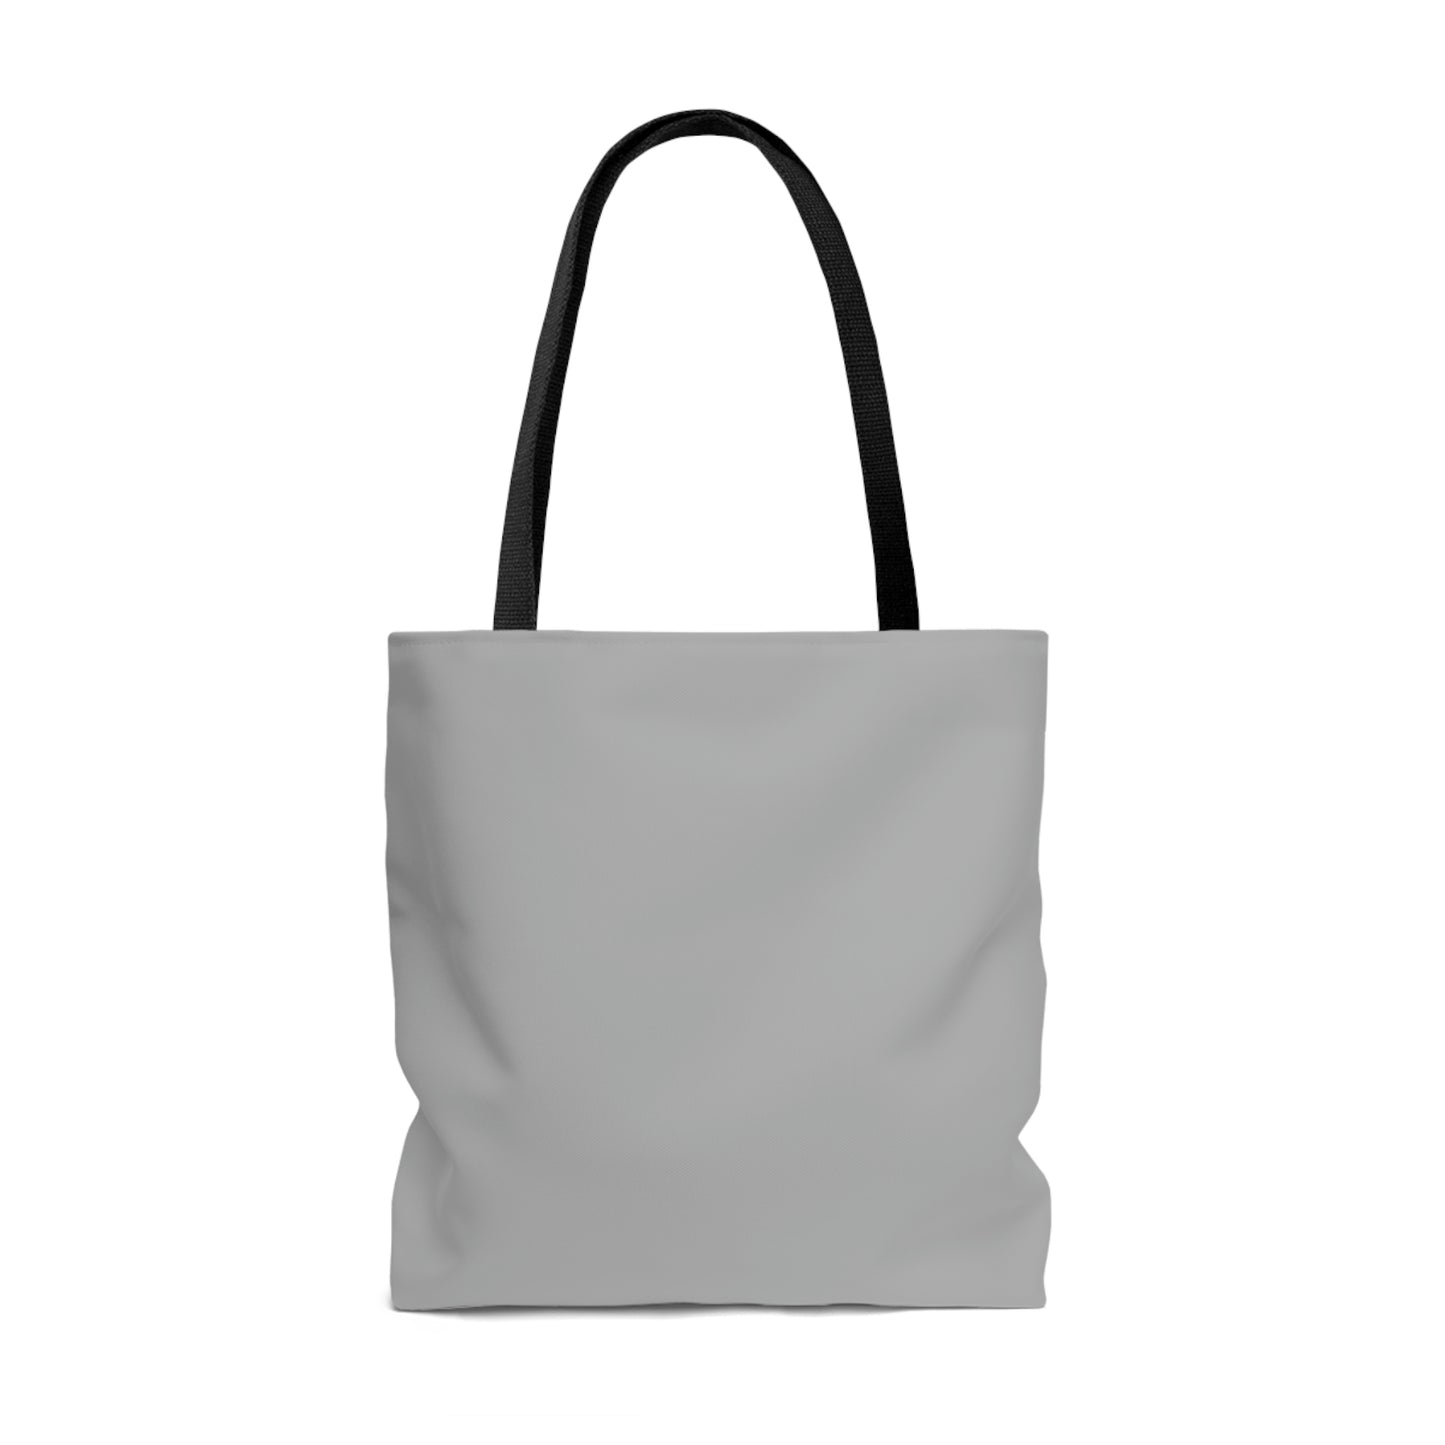 Sown In Sin Reaped In Redemption Tote Bag